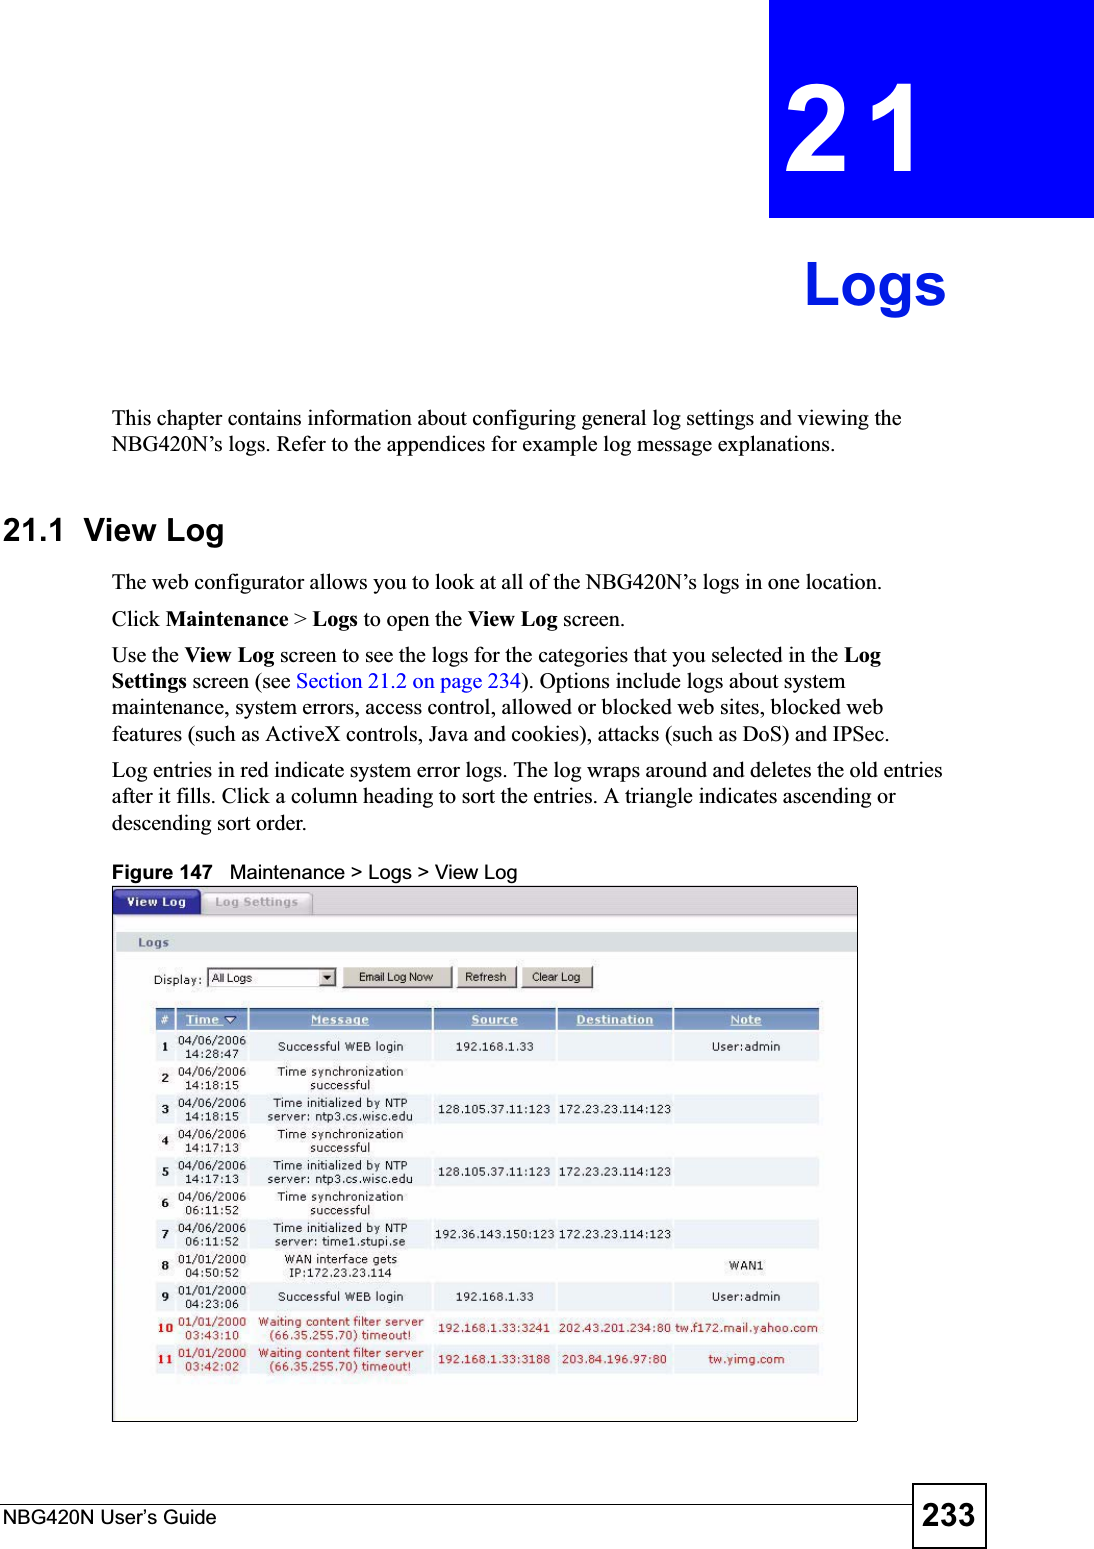 NBG420N User’s Guide 233CHAPTER 21LogsThis chapter contains information about configuring general log settings and viewing the NBG420N’s logs. Refer to the appendices for example log message explanations.21.1  View Log The web configurator allows you to look at all of the NBG420N’s logs in one location. Click Maintenance &gt; Logs to open the View Log screen. Use the View Log screen to see the logs for the categories that you selected in the LogSettings screen (see Section 21.2 on page 234). Options include logs about system maintenance, system errors, access control, allowed or blocked web sites, blocked web features (such as ActiveX controls, Java and cookies), attacks (such as DoS) and IPSec.Log entries in red indicate system error logs. The log wraps around and deletes the old entries after it fills. Click a column heading to sort the entries. A triangle indicates ascending or descending sort order. Figure 147   Maintenance &gt; Logs &gt; View Log 